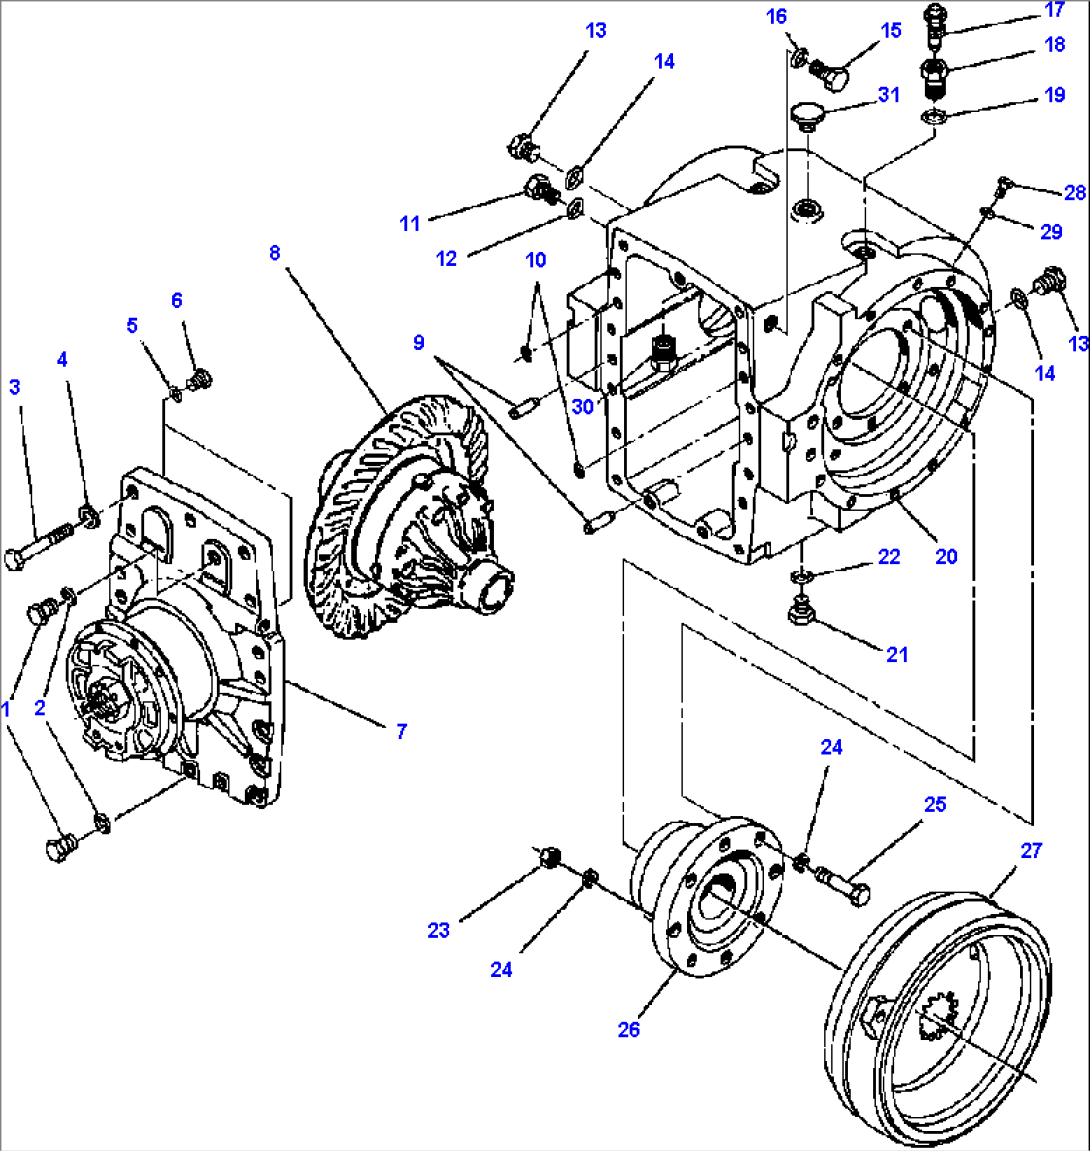 DIFFERENTIAL CASE ASSEMBLY NoSPIN DIFFERENTIAL